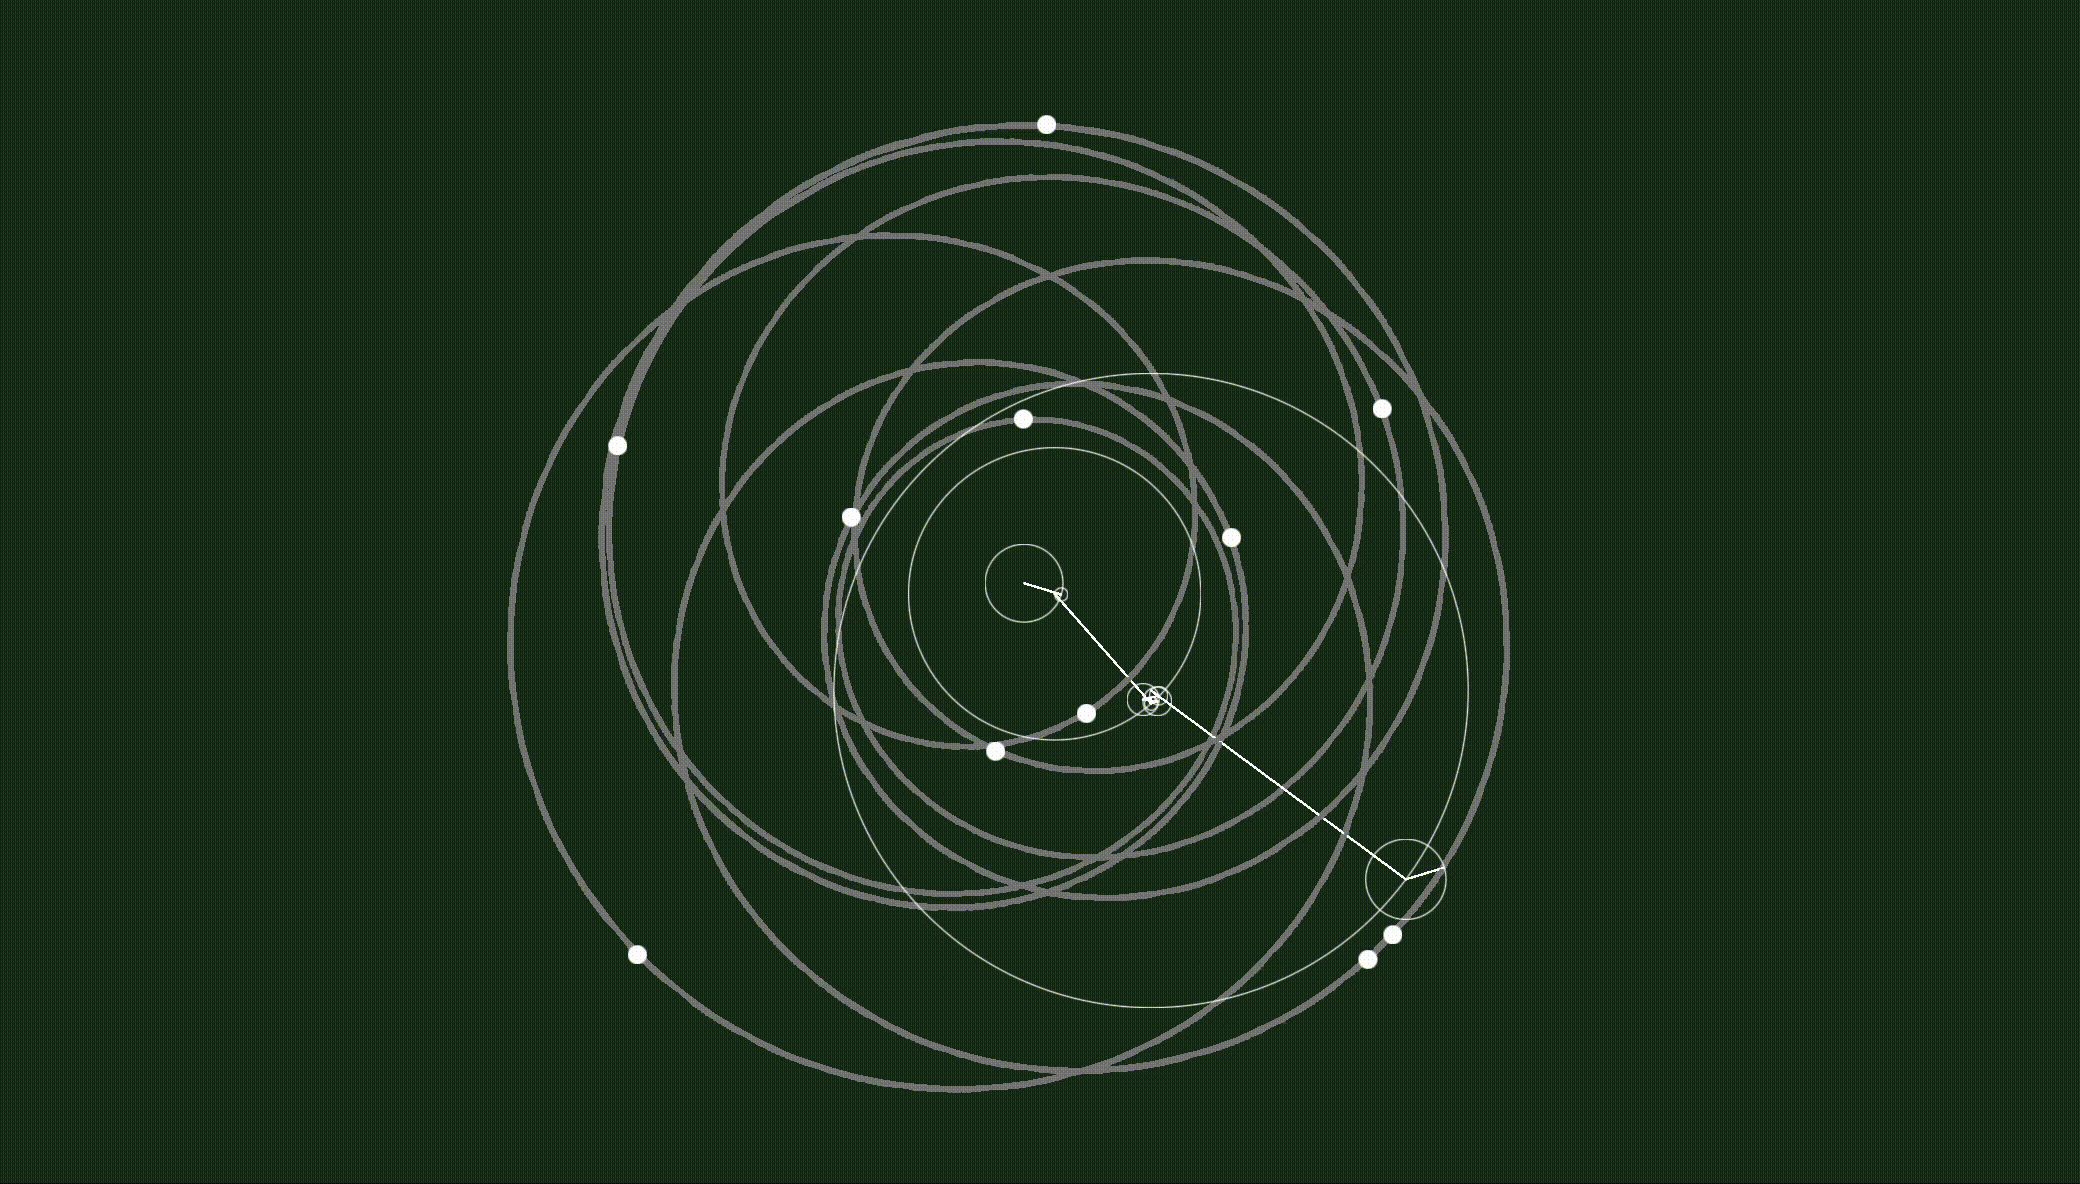 Fourier epicycles rapidly make circles